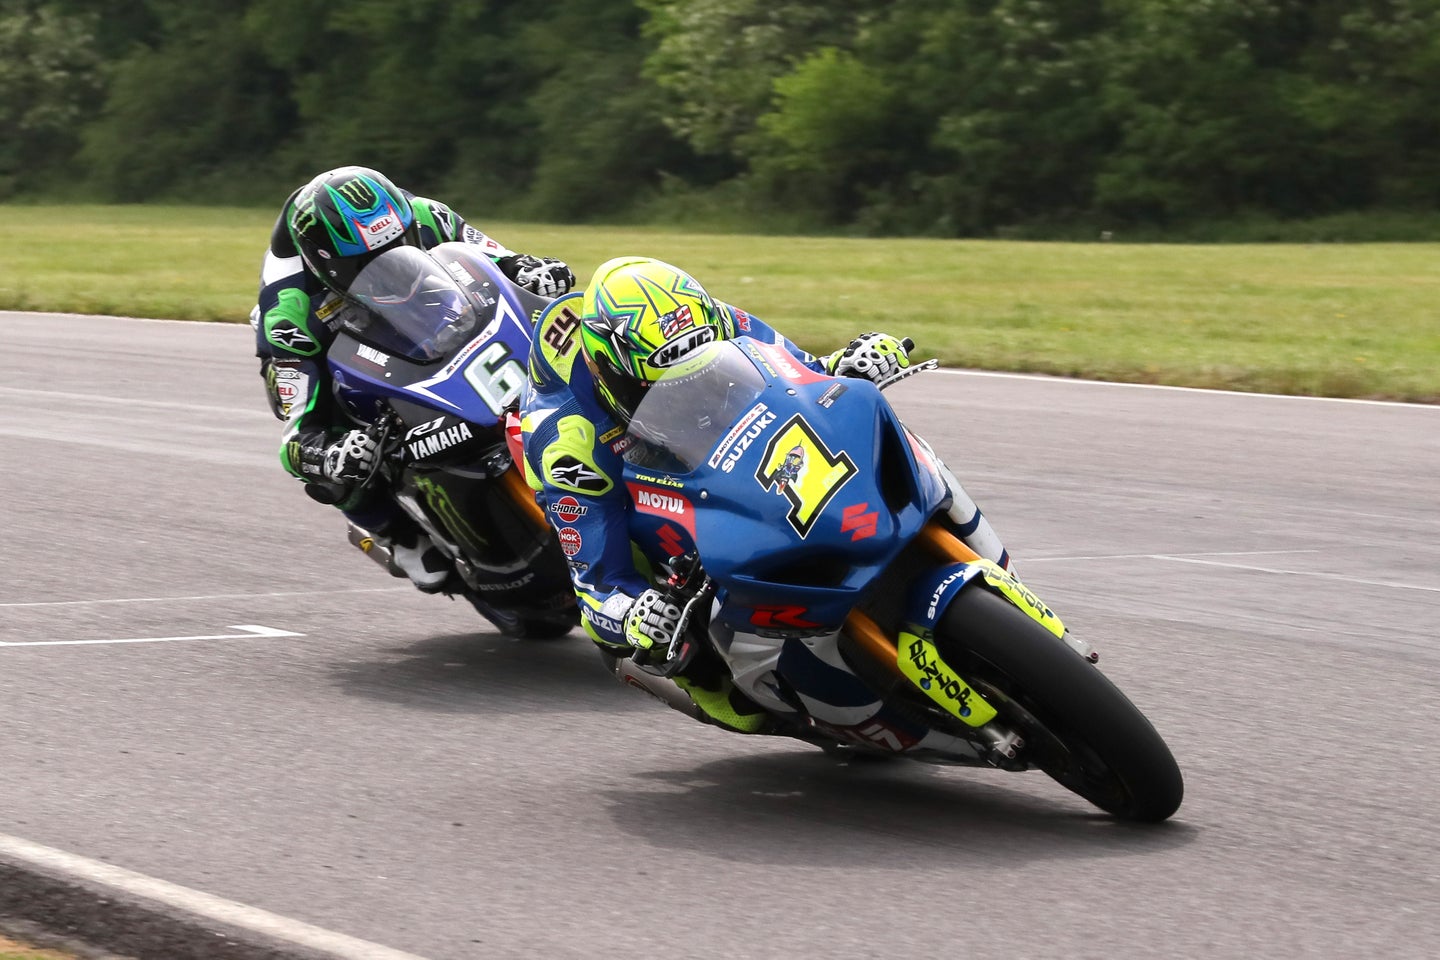 Elias Wins MotoAmerica Superbike Competition Over Beaubier By a Hair